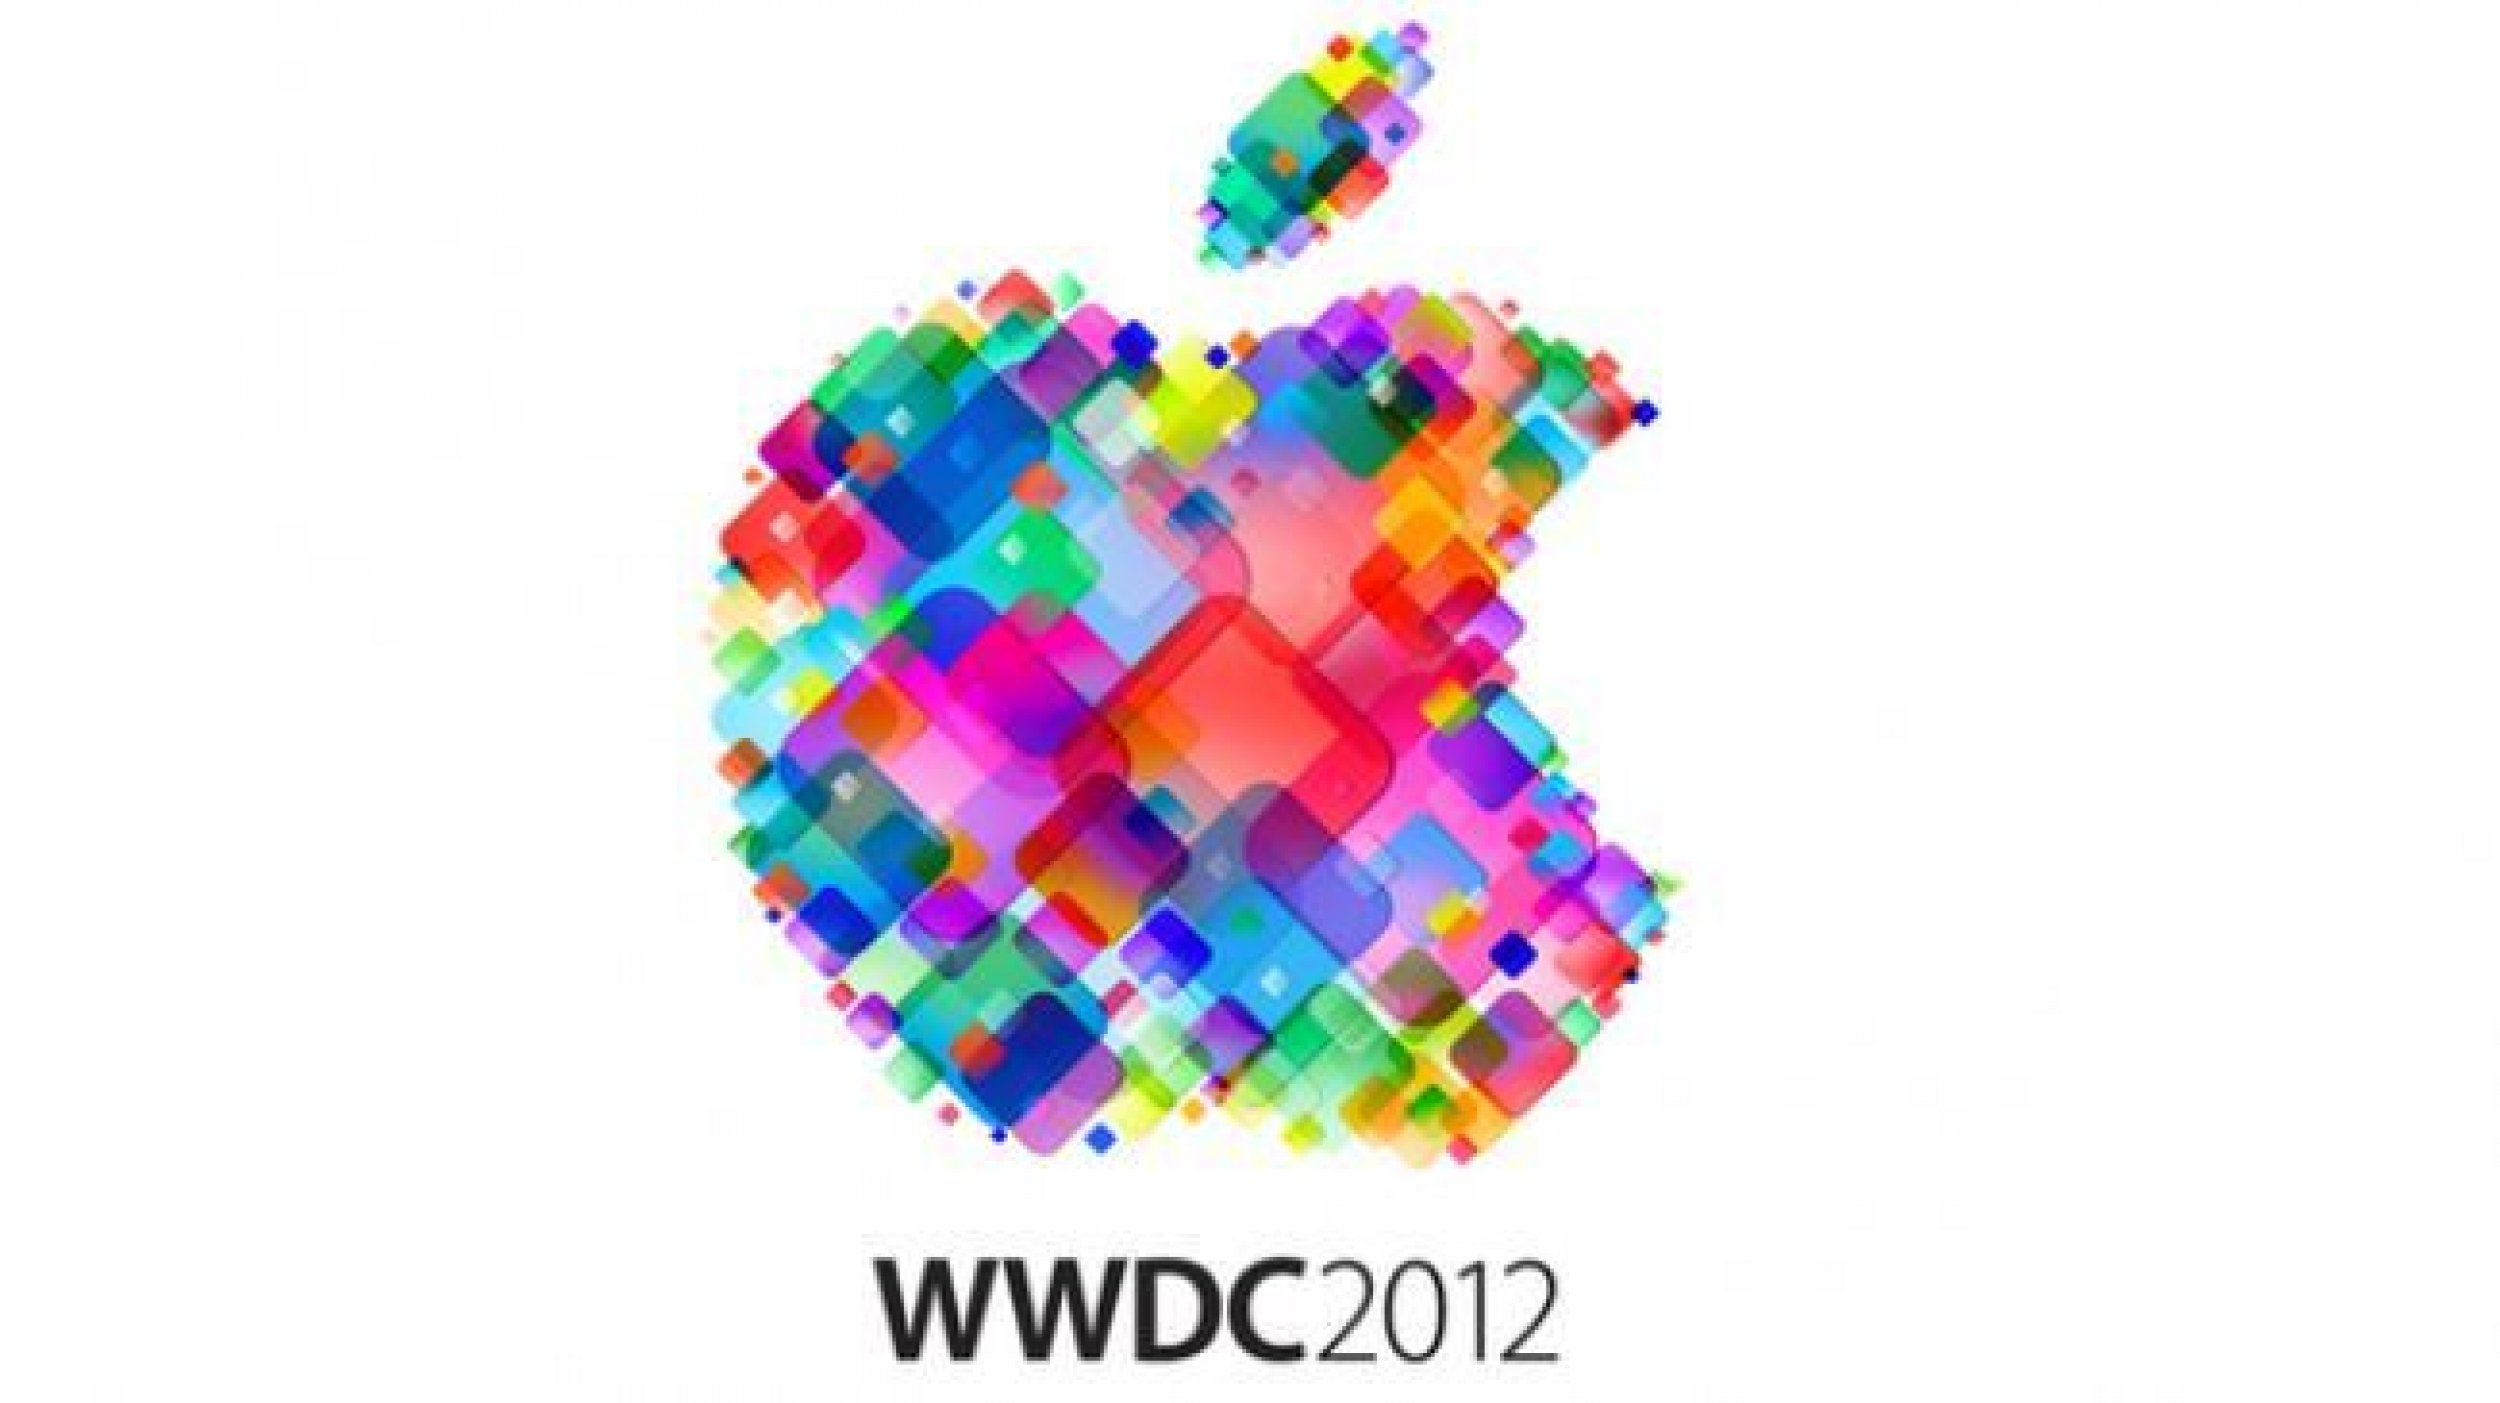 Apple WWDC 2012 Dates Announced Tickets Sold Out for June 11-15 Event